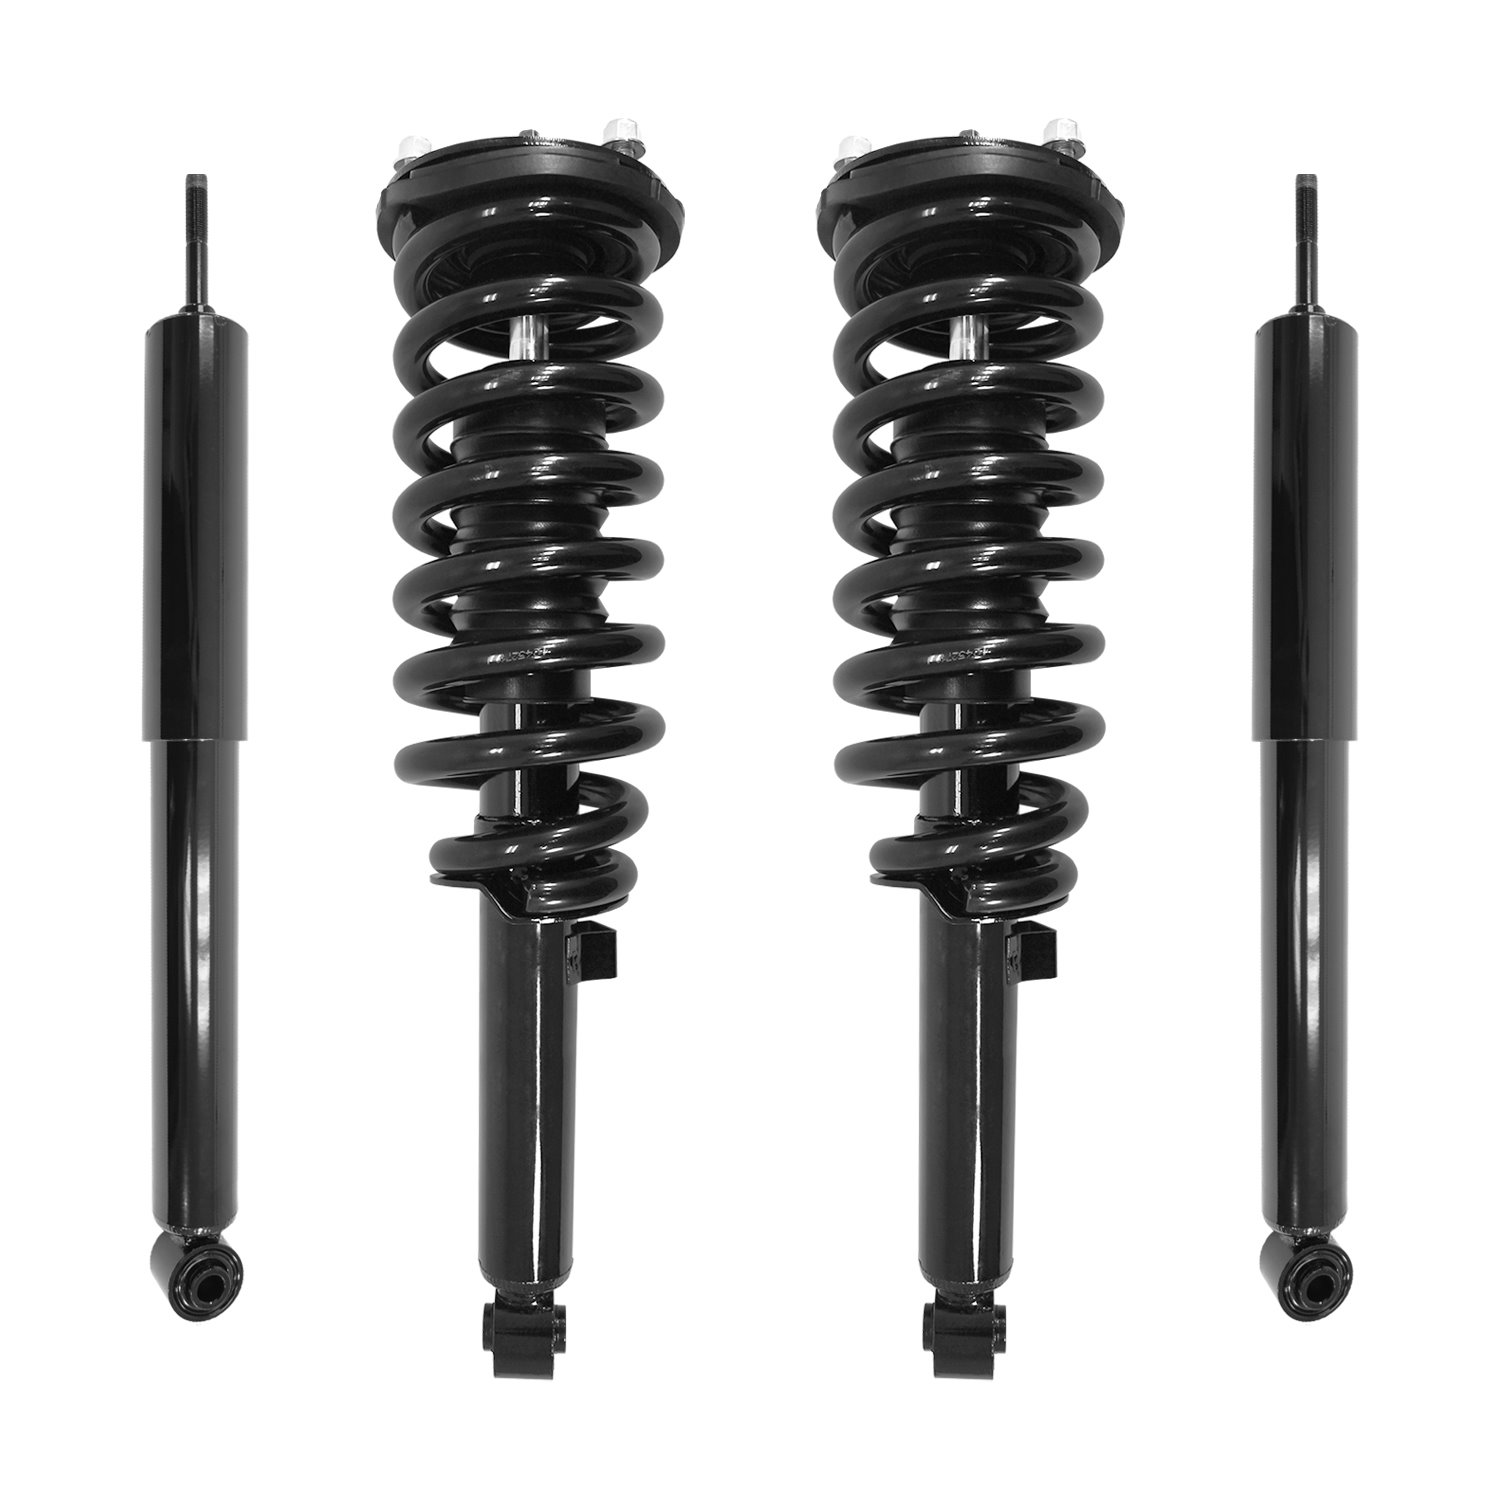 4-11653-259260-001 Front & Rear Suspension Strut & Coil Spring Assembly Fits Select Kia Sorento